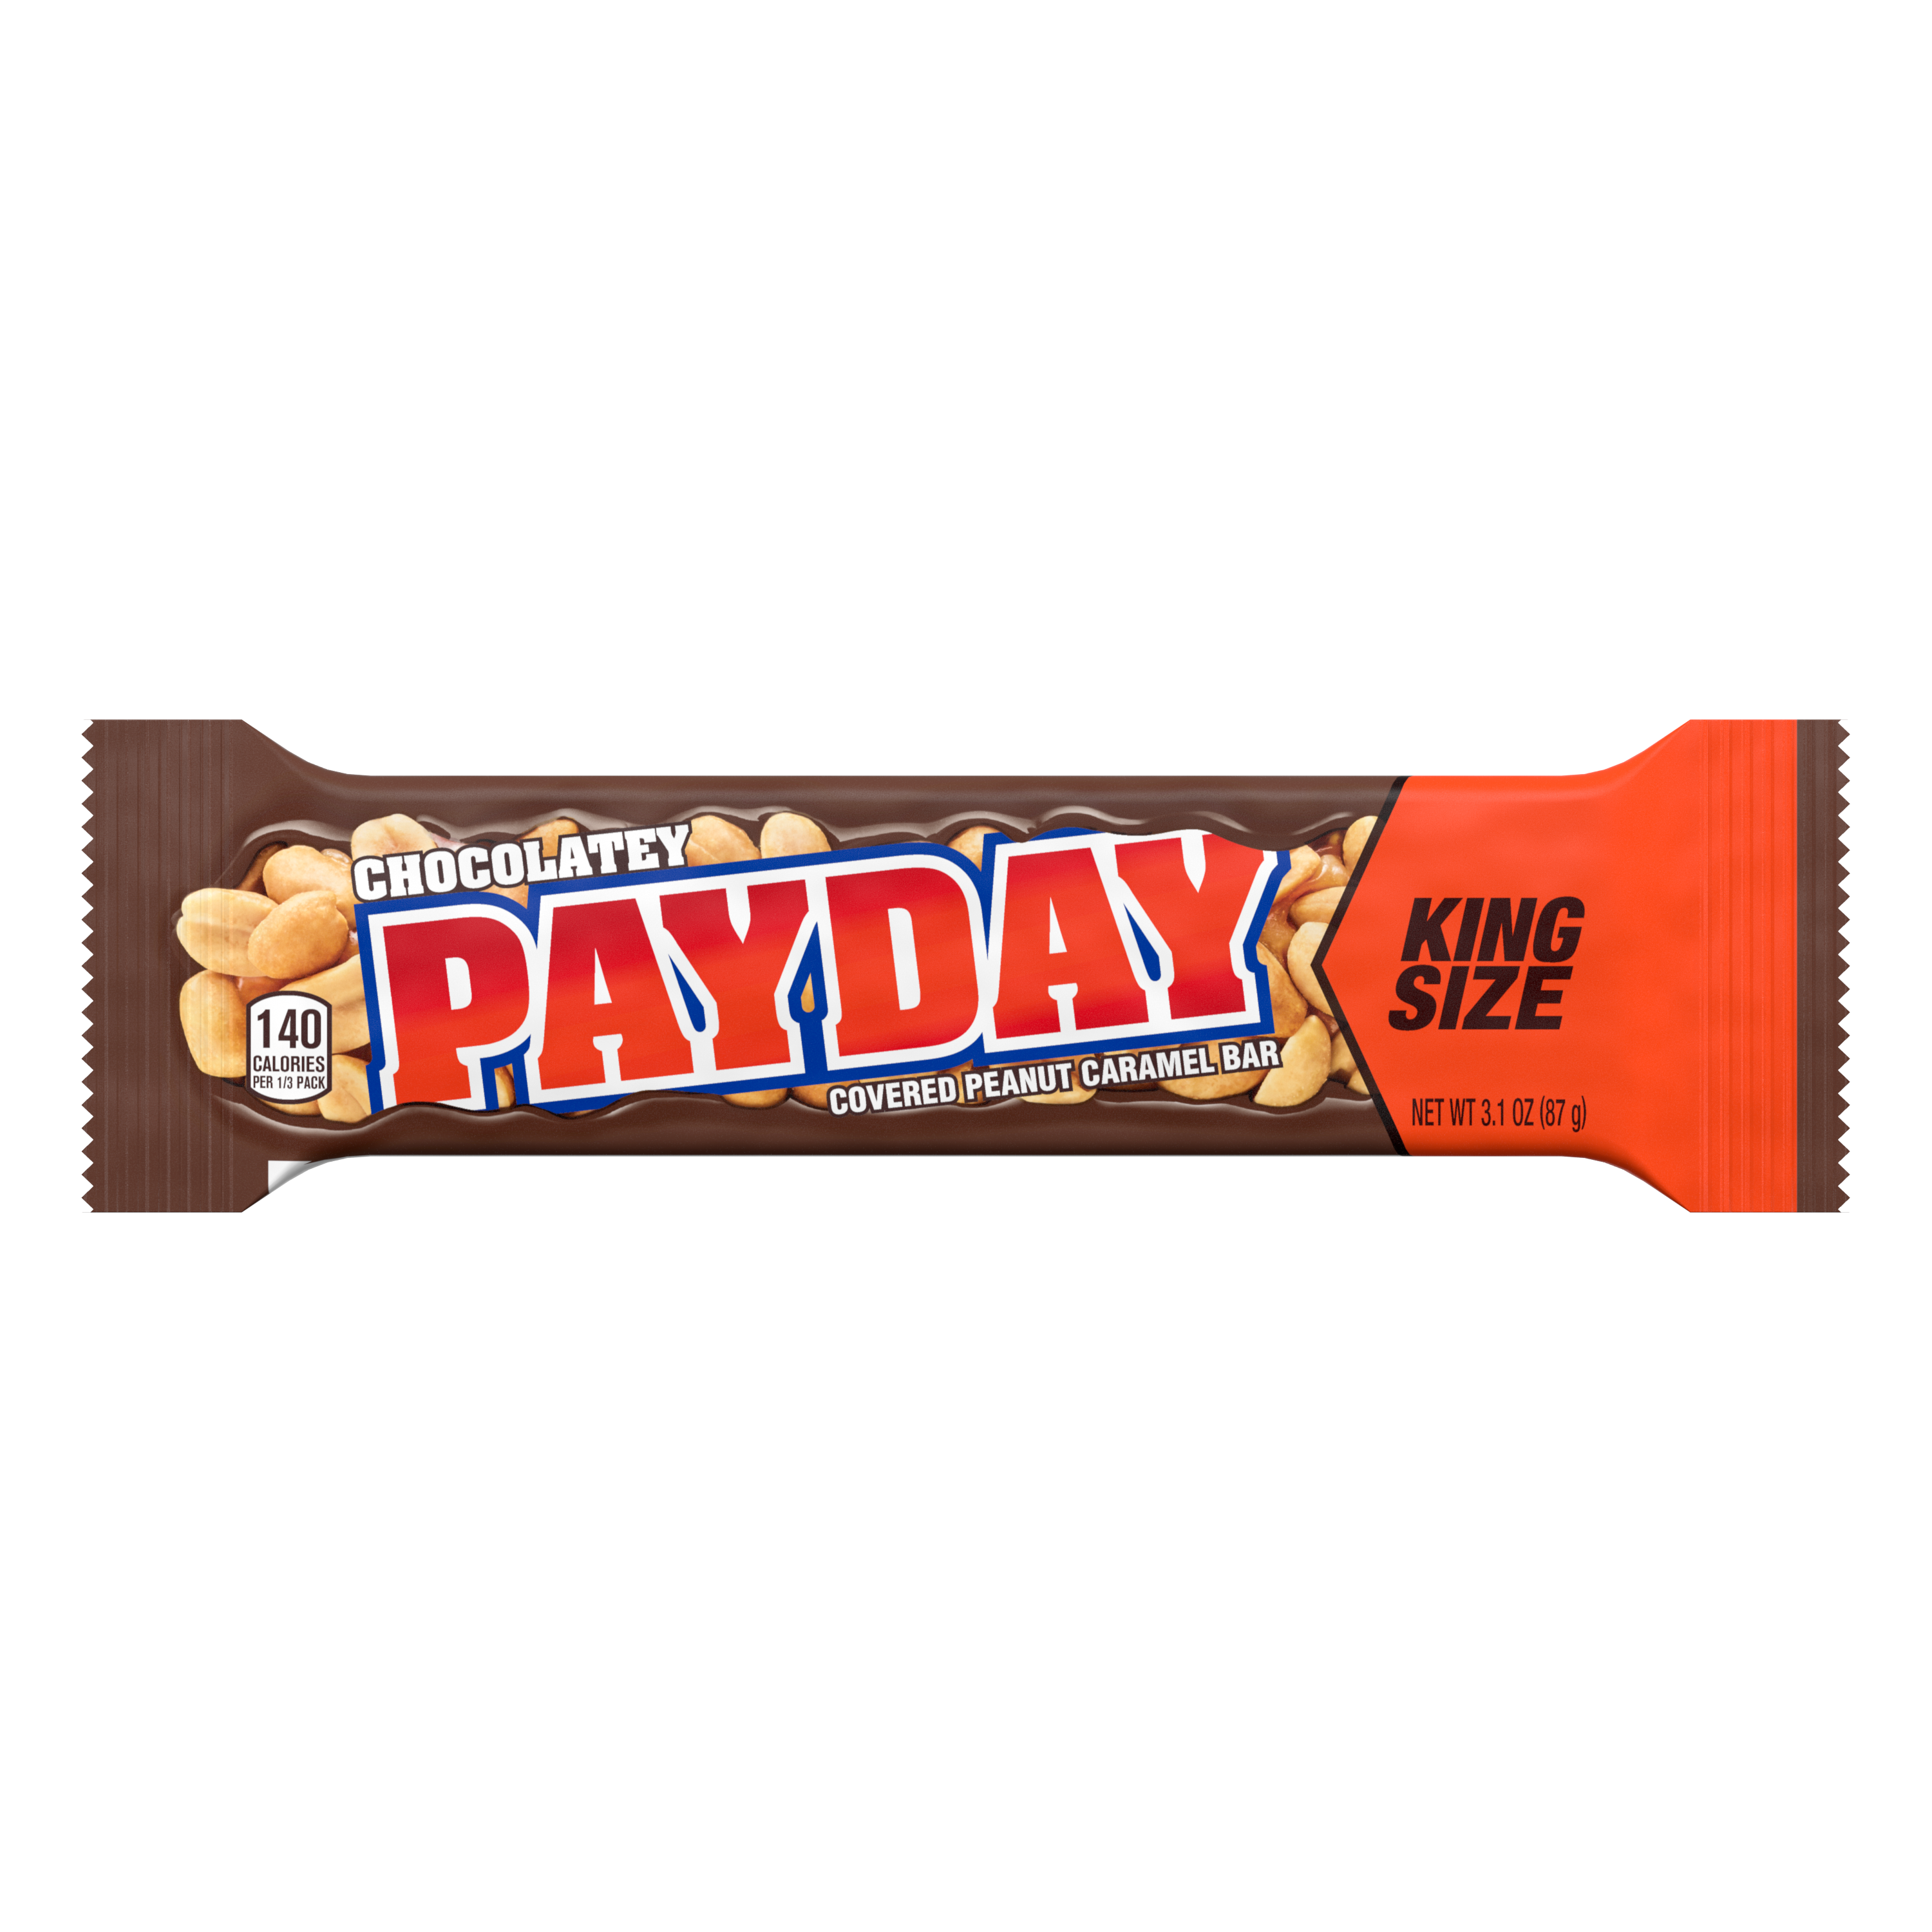 PAYDAY Chocolatey Covered Peanut and Caramel King Size Candy Bar, 3.1 oz - Front of Package